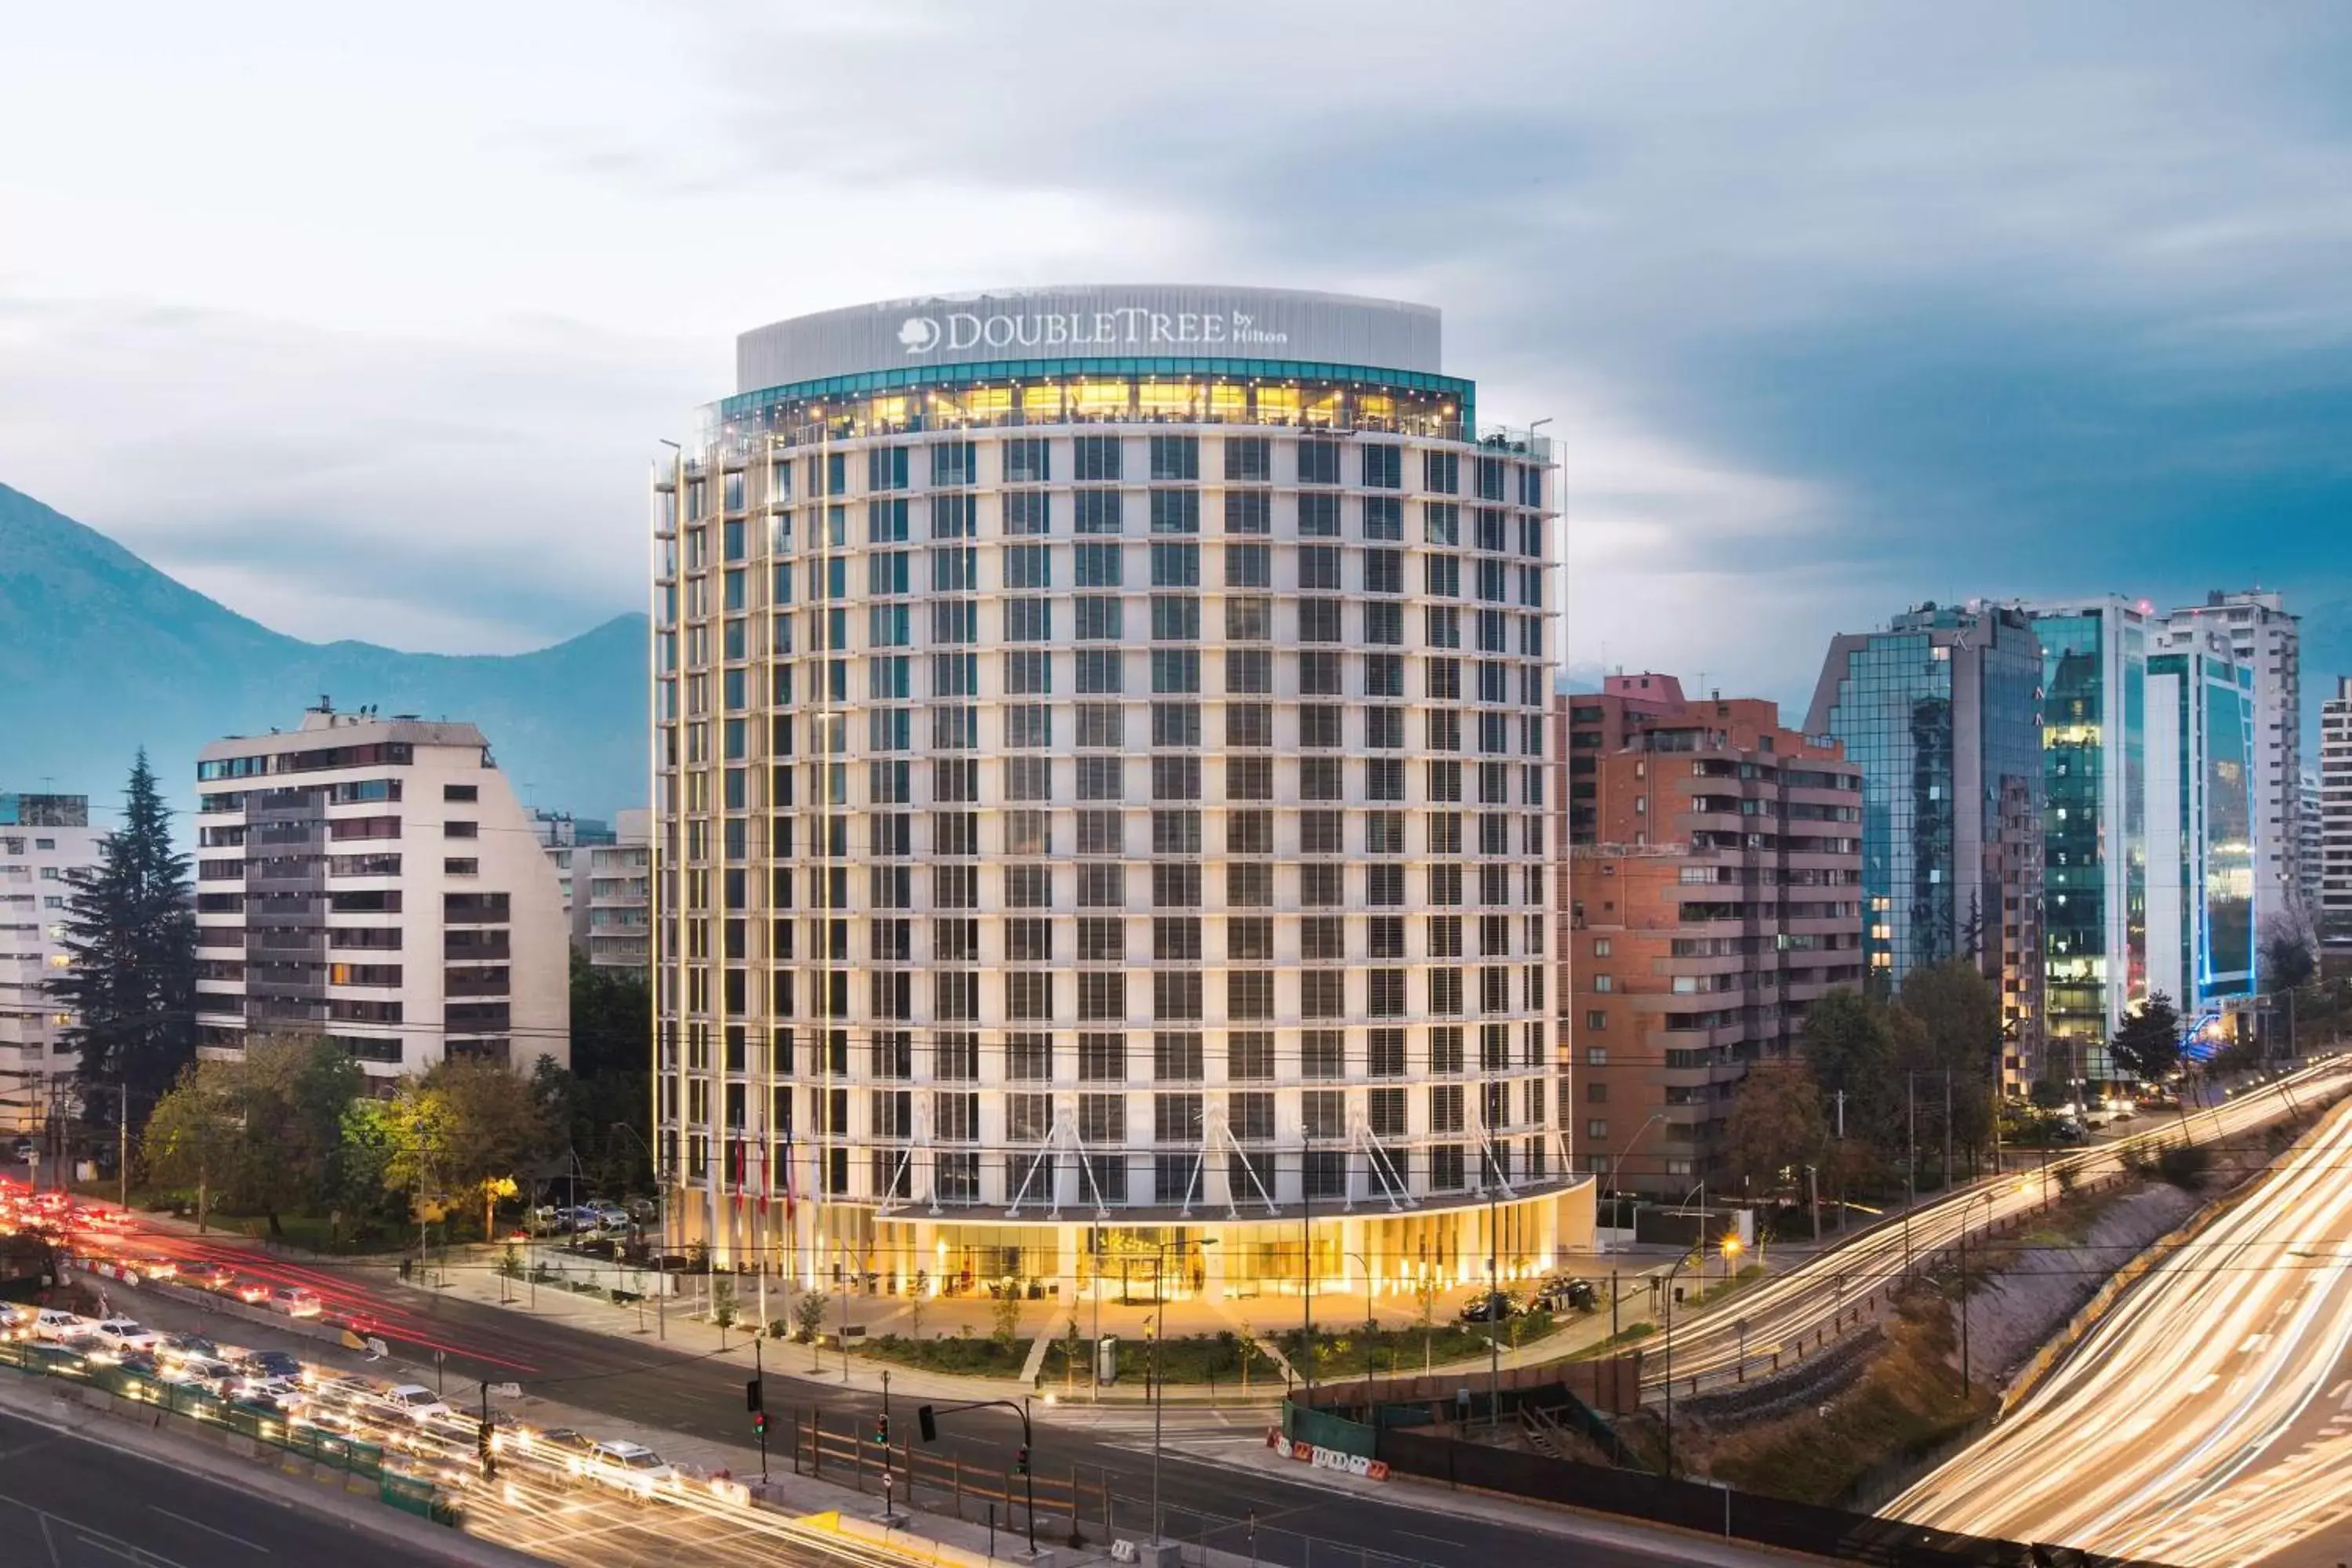 Property building in DoubleTree by Hilton Santiago Kennedy, Chile